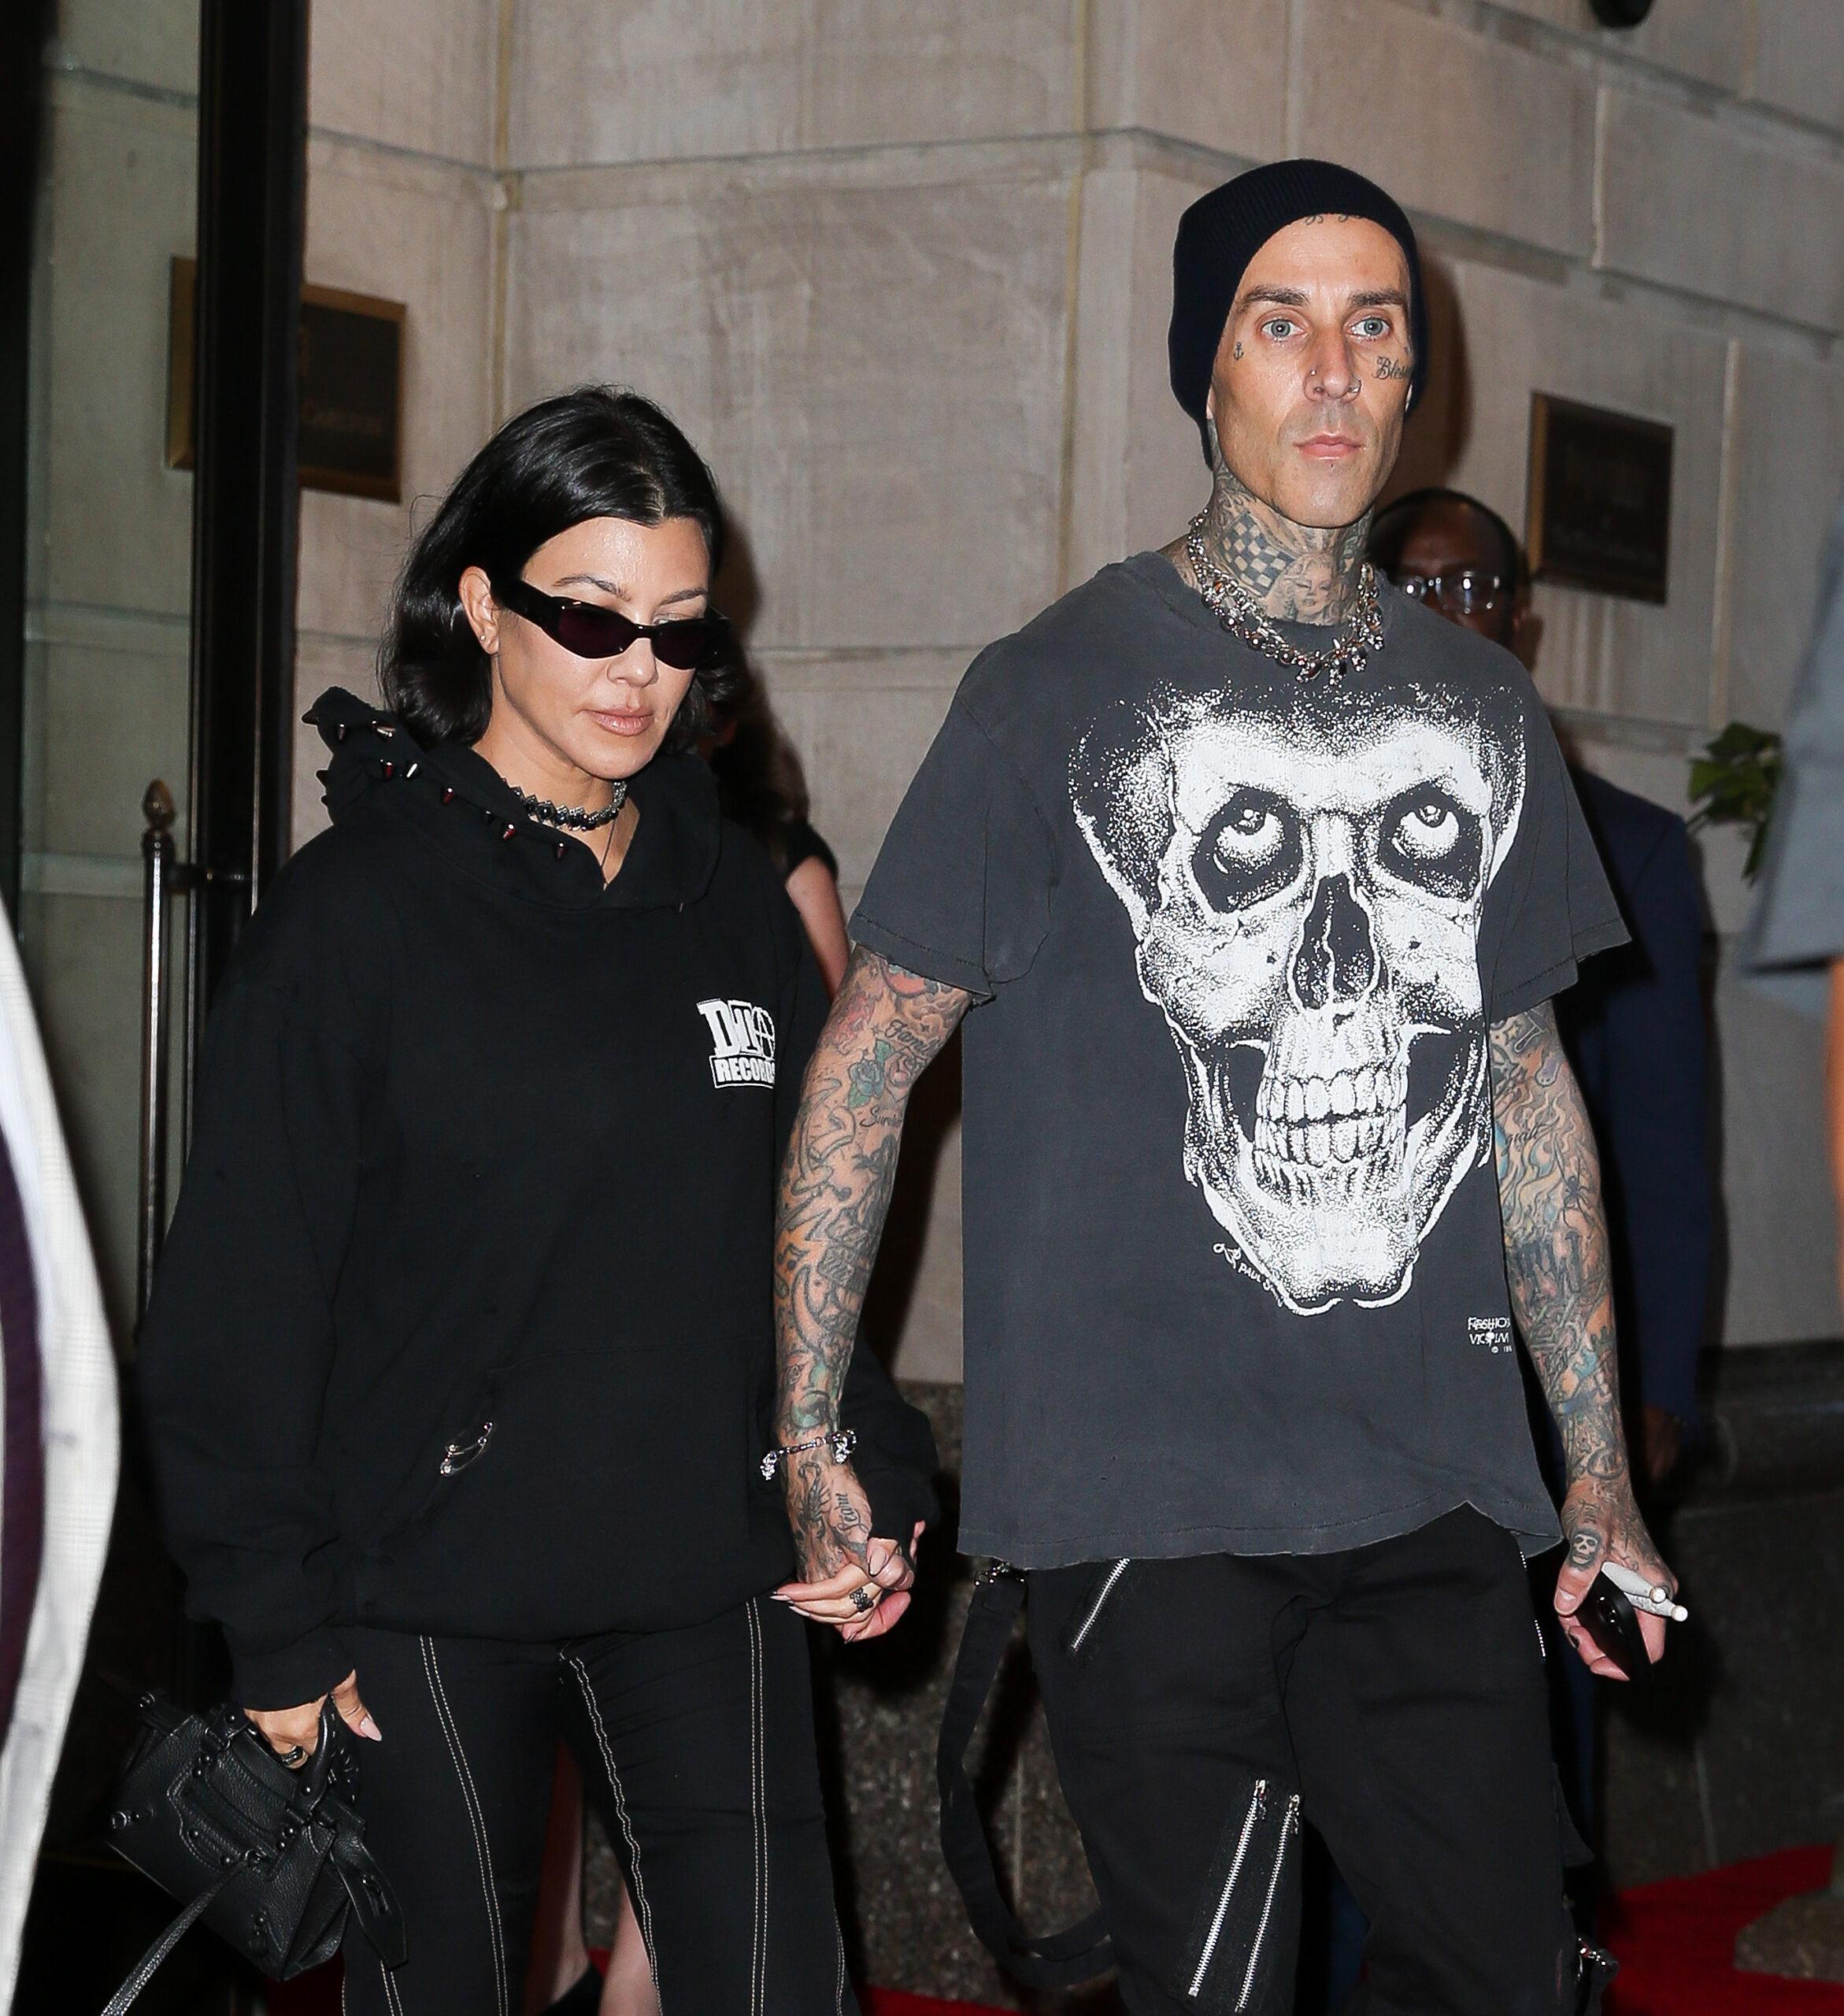 Kourtney Kardashian and Travis Barker seen hand-in-hand as leaving their hotel in NYC